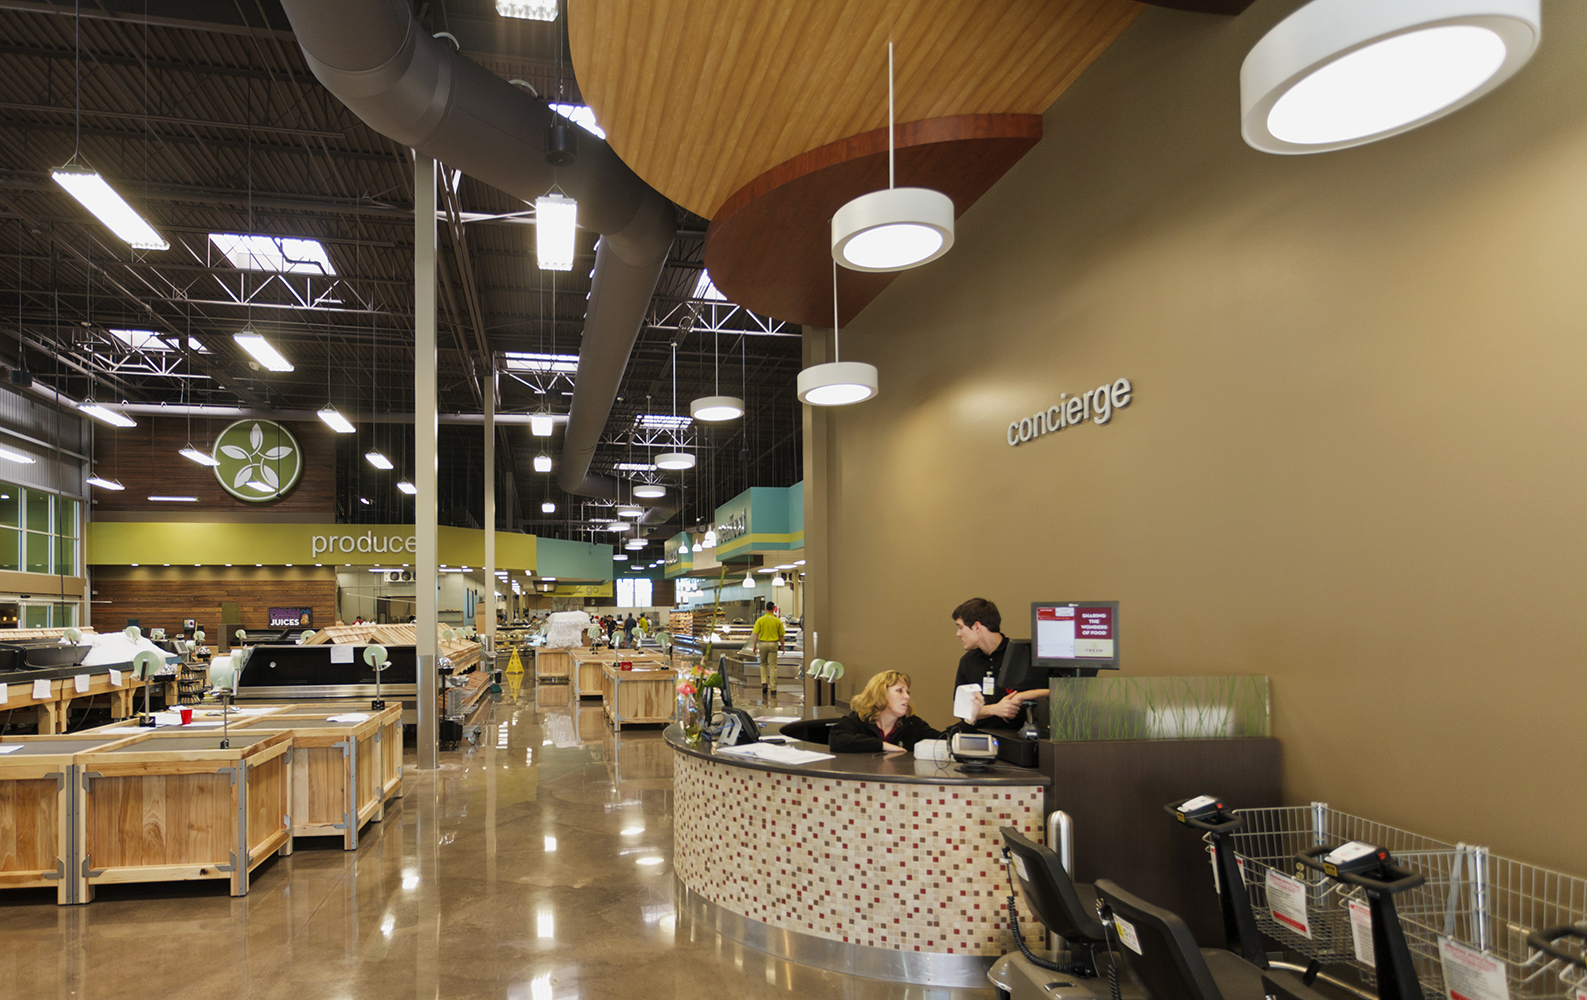 Omnience fixtures are good for retail lighting designs, seen here above a checkout area in a modern grocery store.